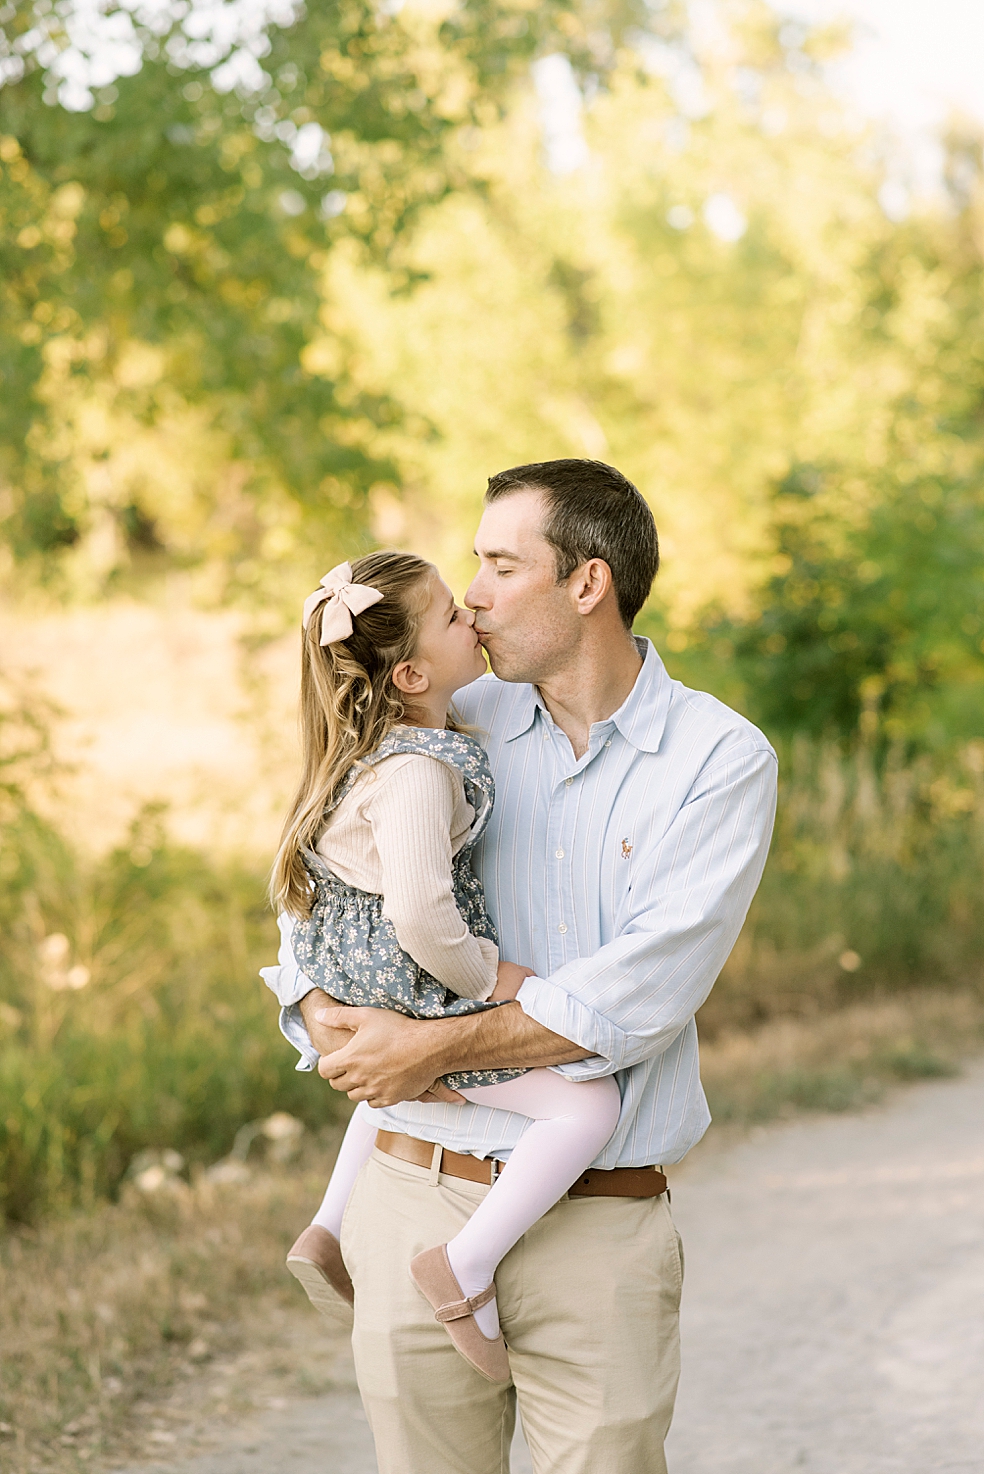 Daddy and daughter smooch during family photos | Photo by Jessica Lee Photography 